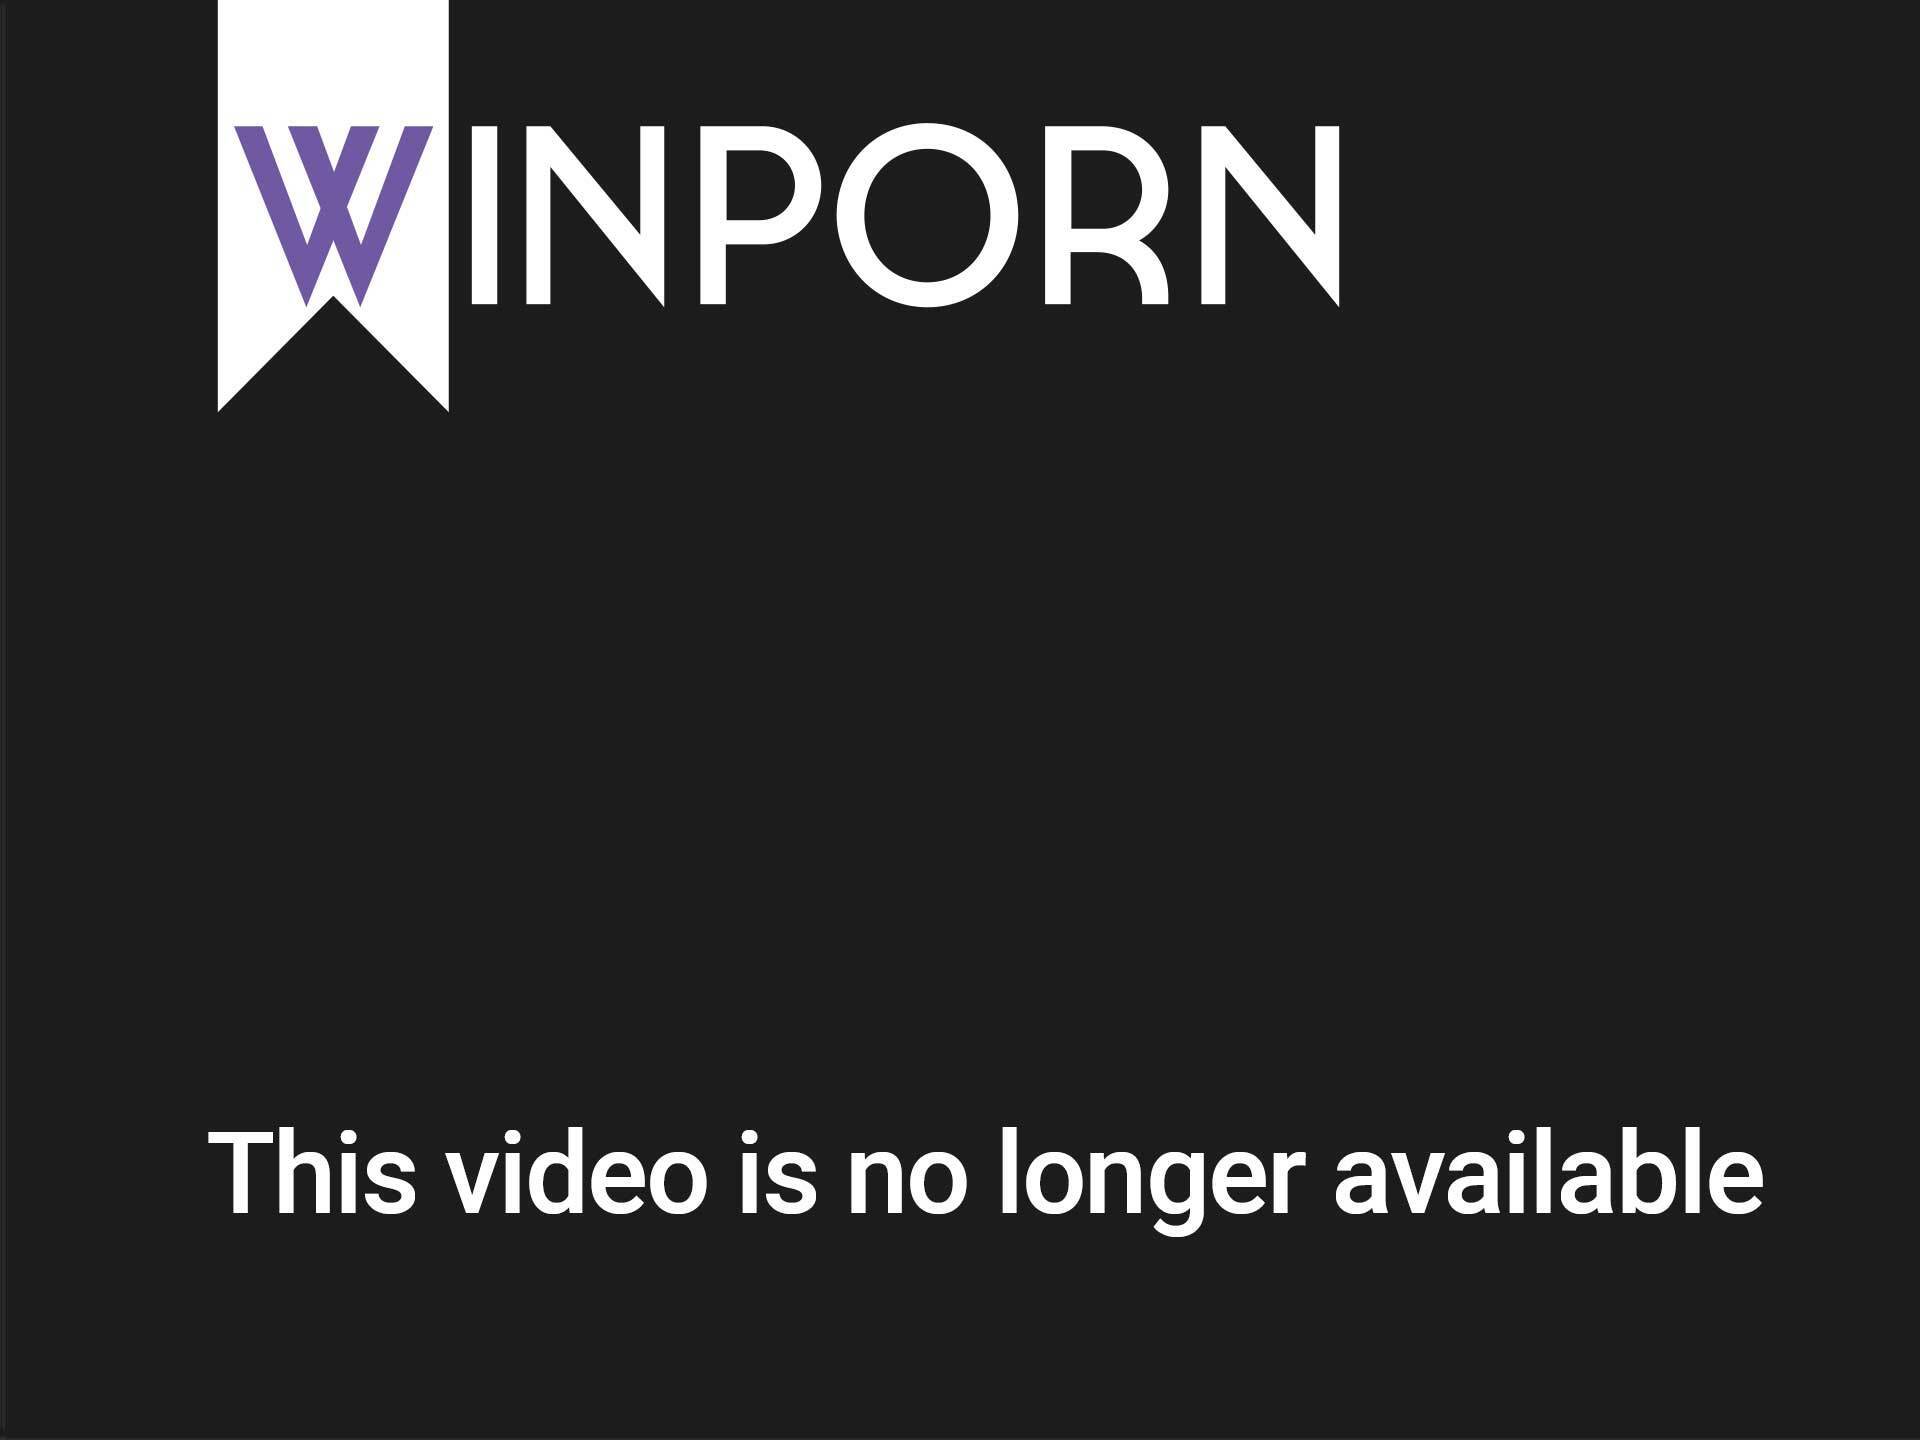 Xxxiii Doinlod - Download Mobile Porn Videos - Small Titted Redhead Amateur Riding Penis In  Close Up - 1161579 - WinPorn.com